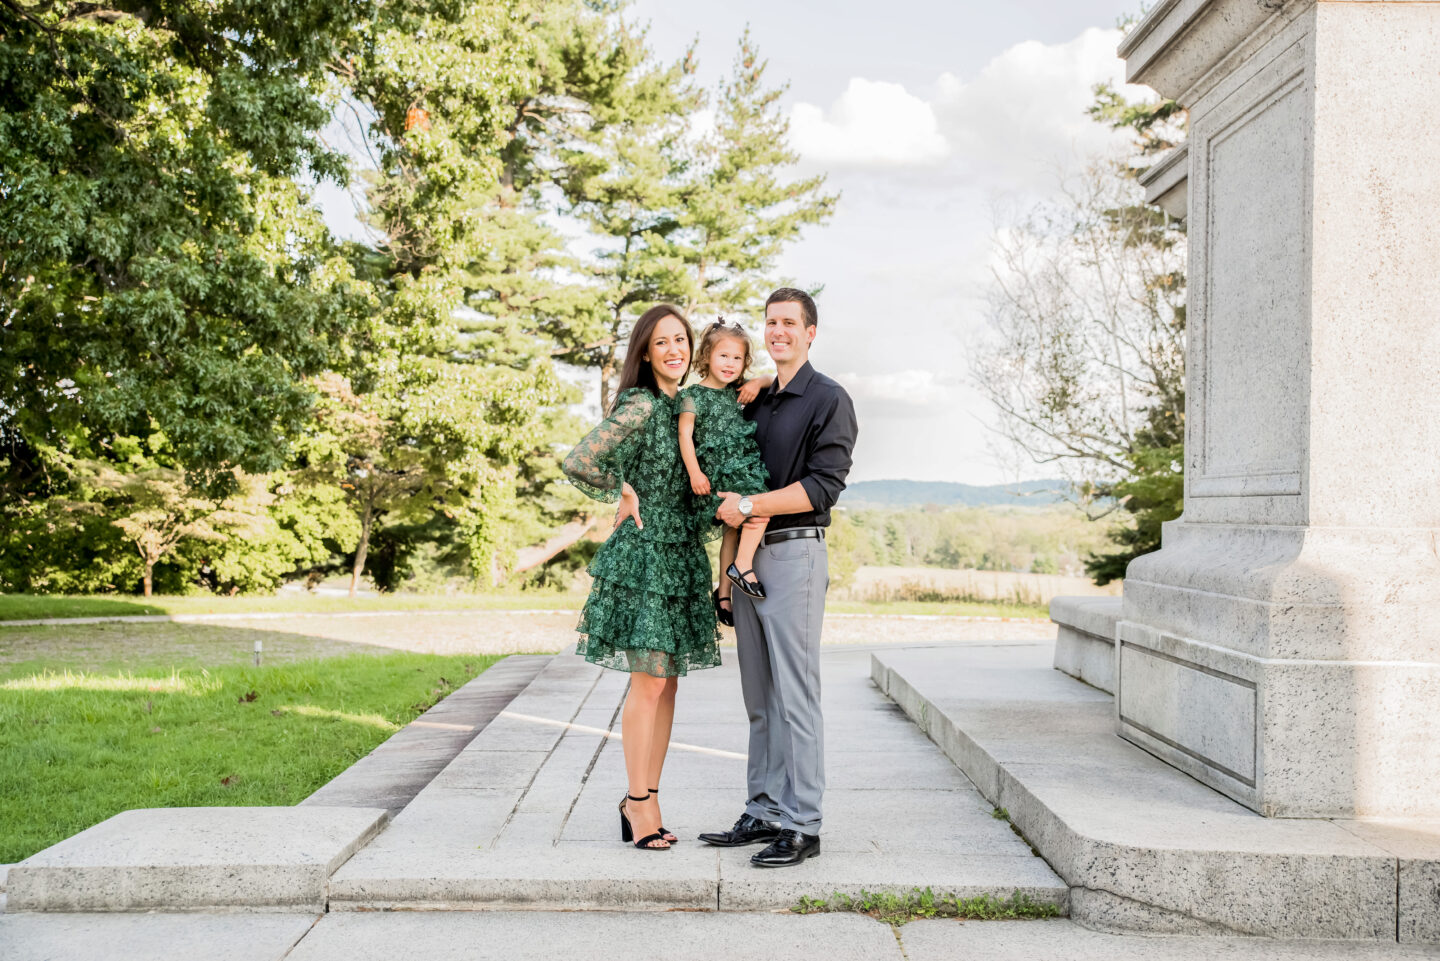 Our 2021 FAMILY PHOTOS - with a Shoott PROMO CODE for 10% off your own photoshoot!